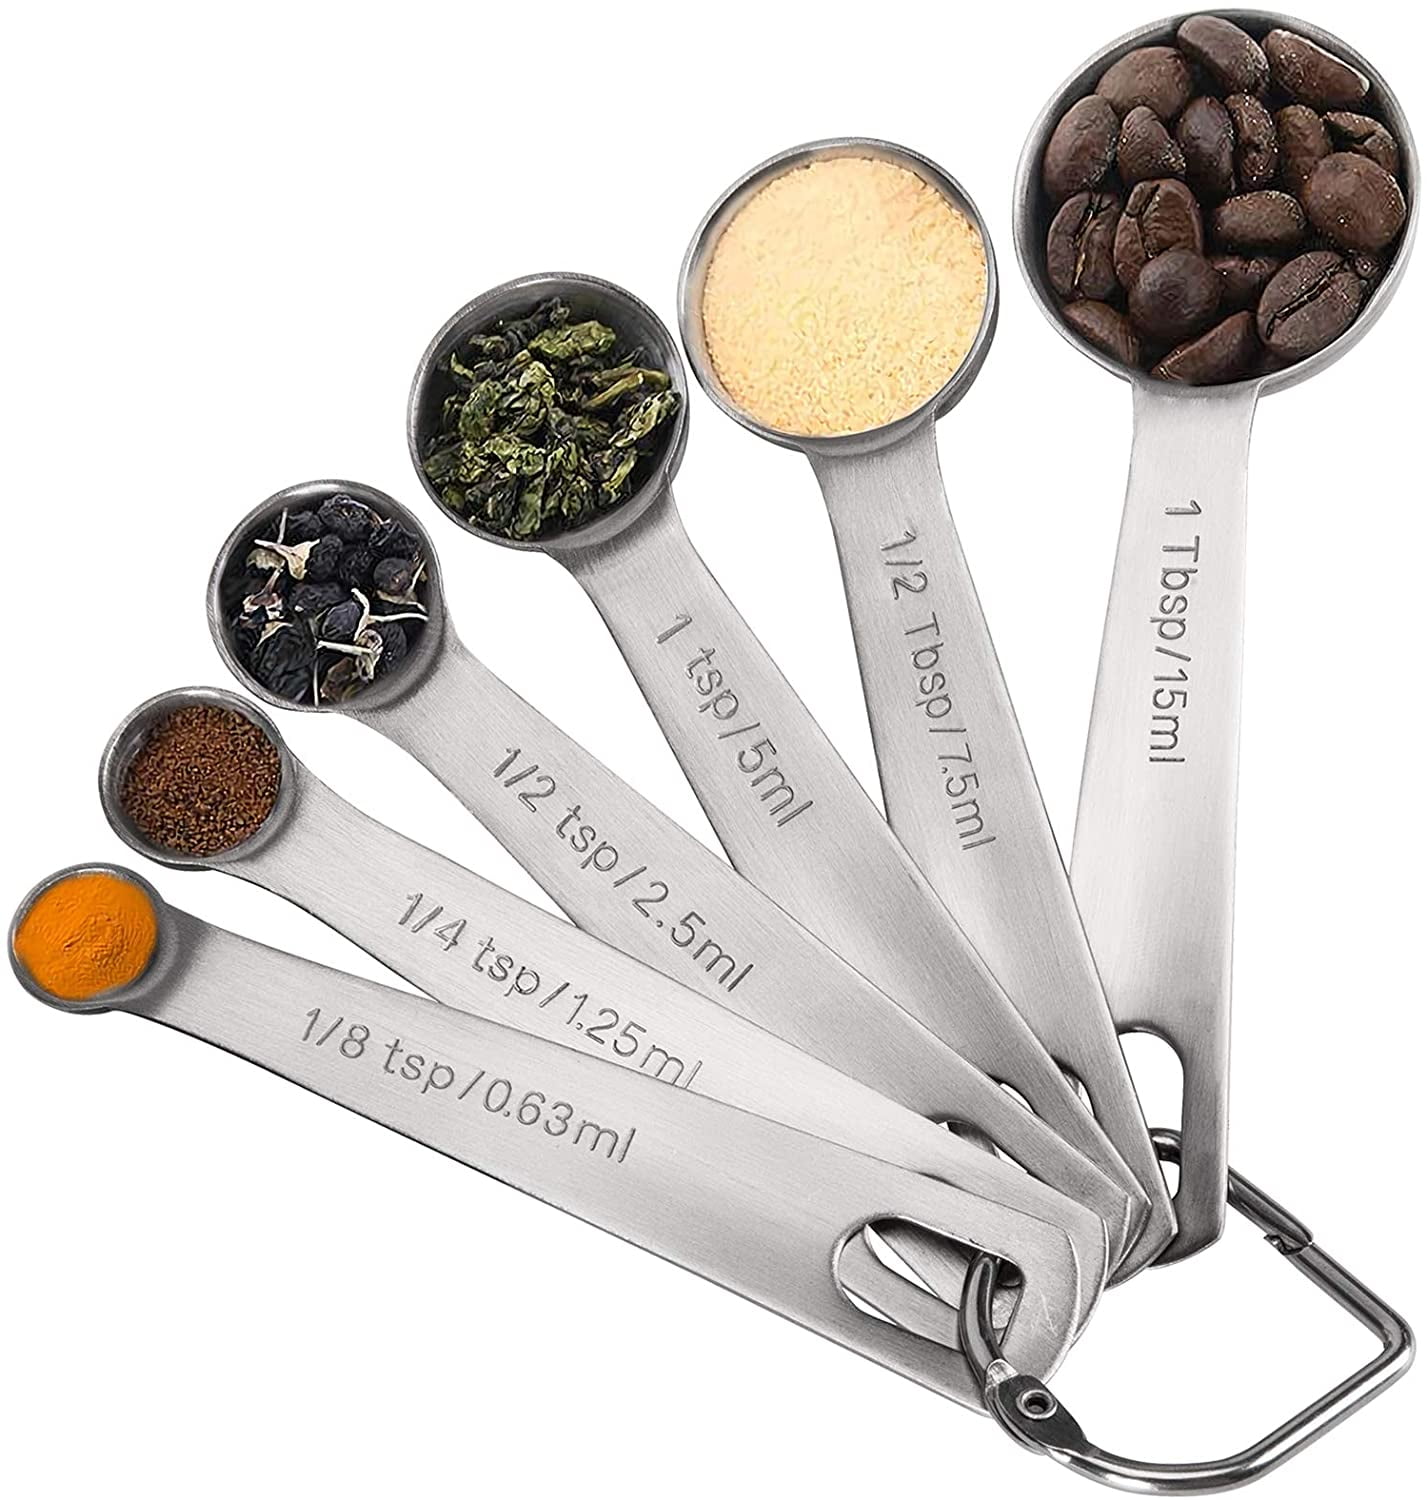 Travelwant 6Pcs/Set Measuring Spoons, Premium Heavy Duty Stainless Steel  Measuring Spoons Cups Set, Small Tablespoon with Metric and US Measurements